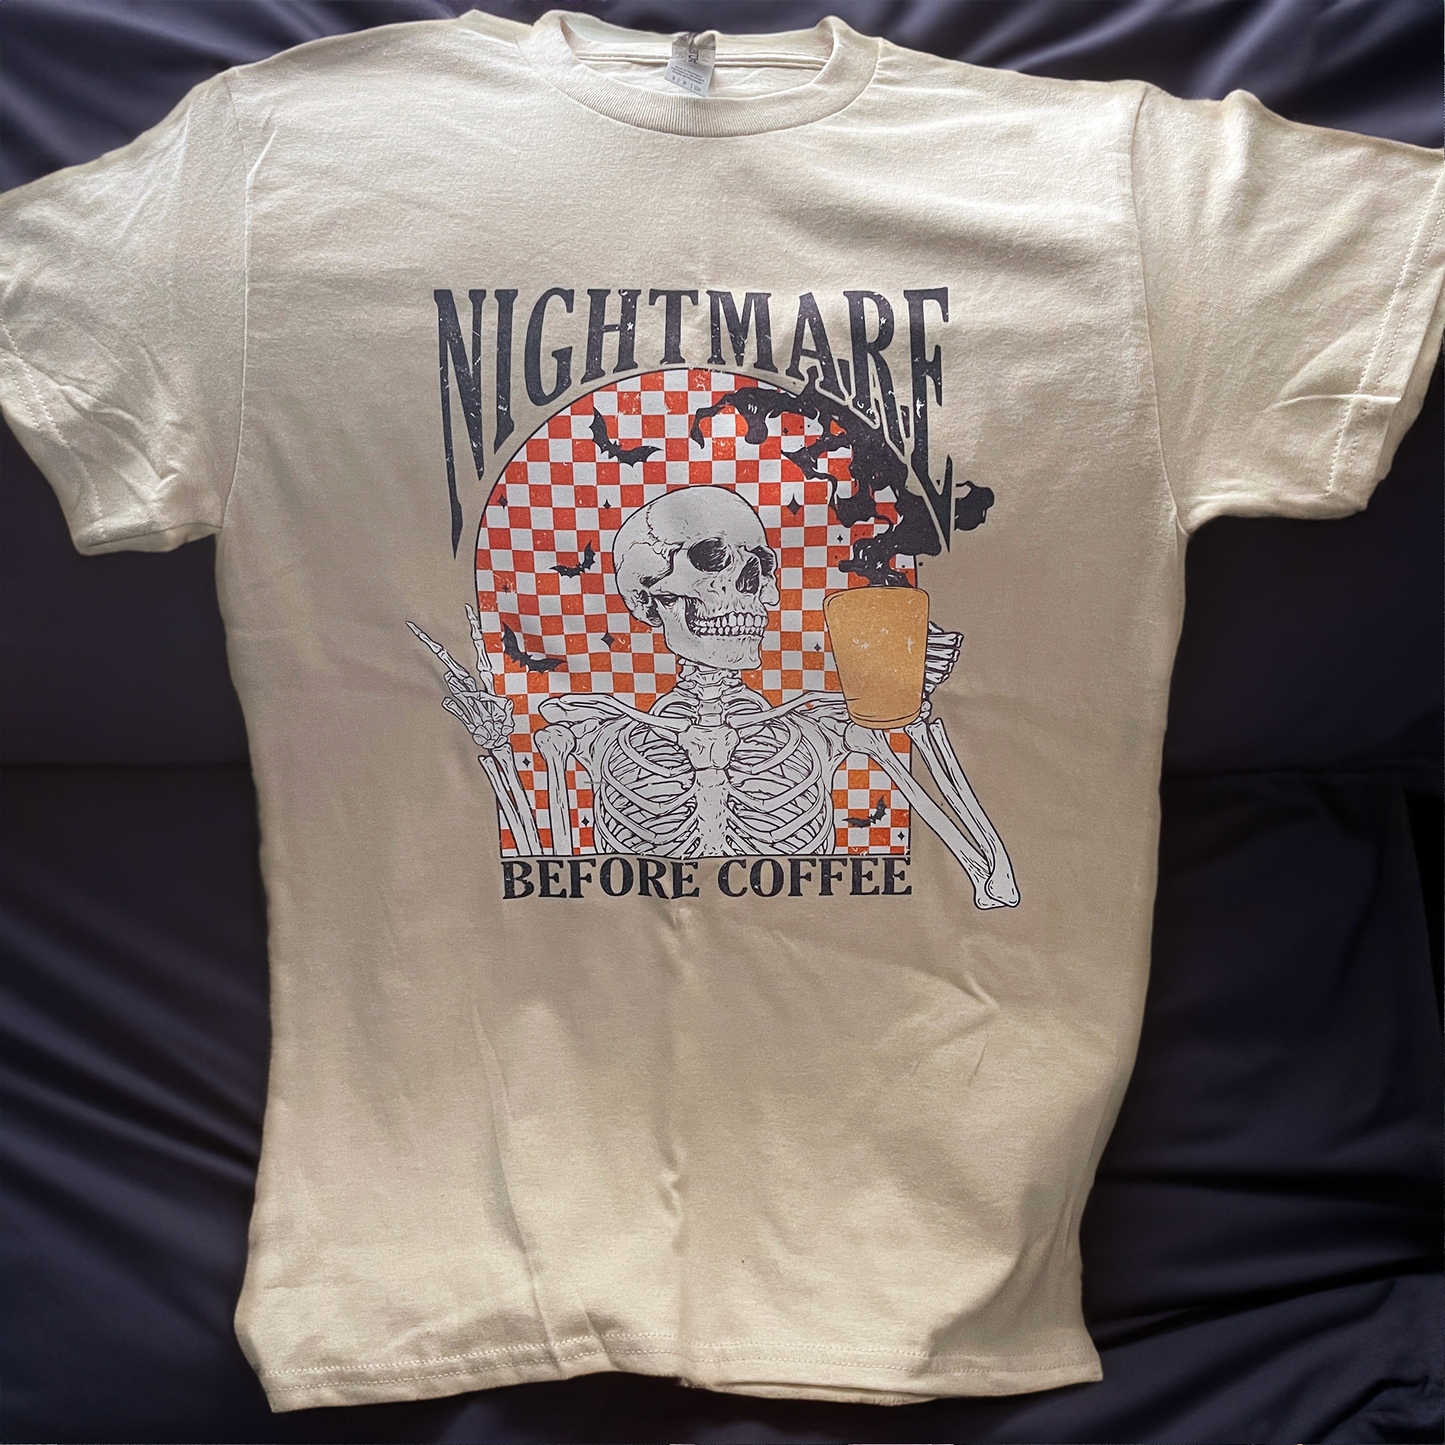 Halloween Vibes: Nightmare Before Coffee Skeleton Unisex Cotton T-Shirt – Spooky Chic Tee with Coffee Lover's Twist